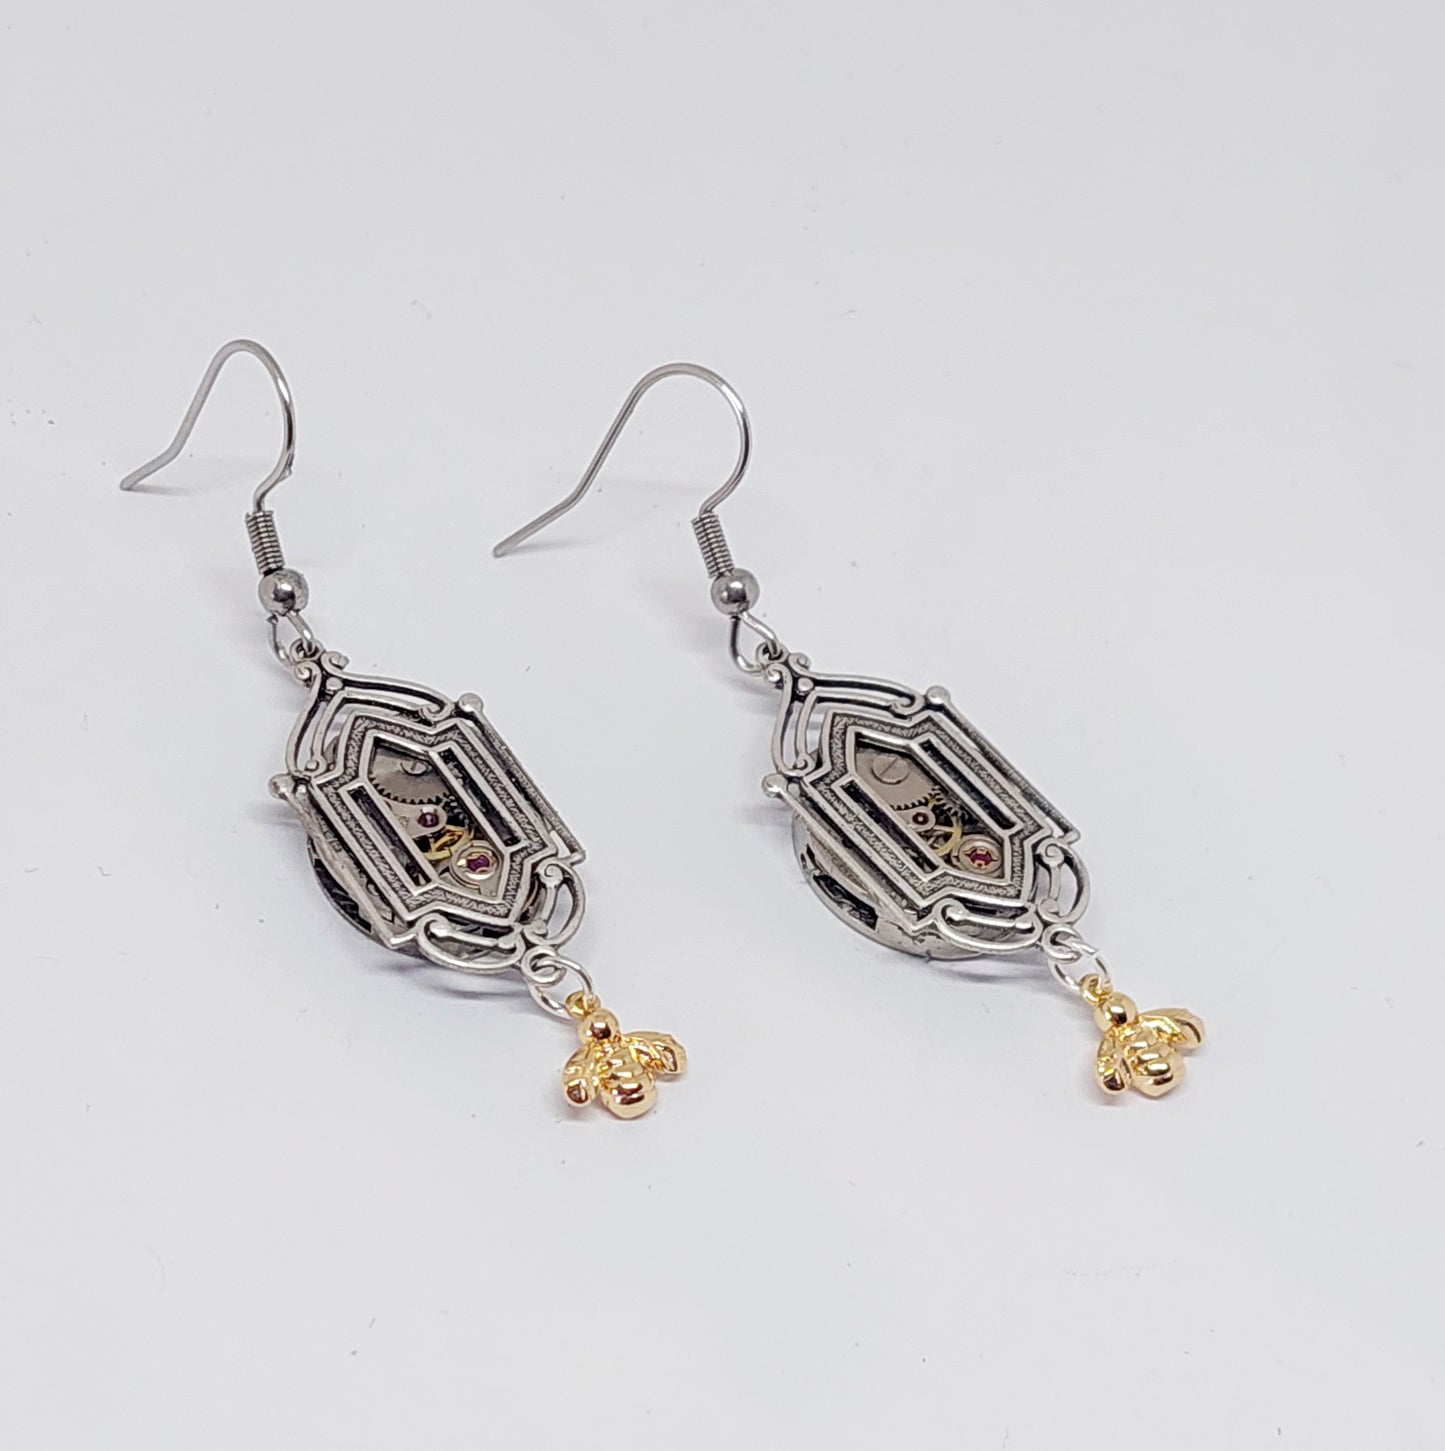 BESTSELLER! NEW!! Art deco window earrings - vintage timepieces with gold bees